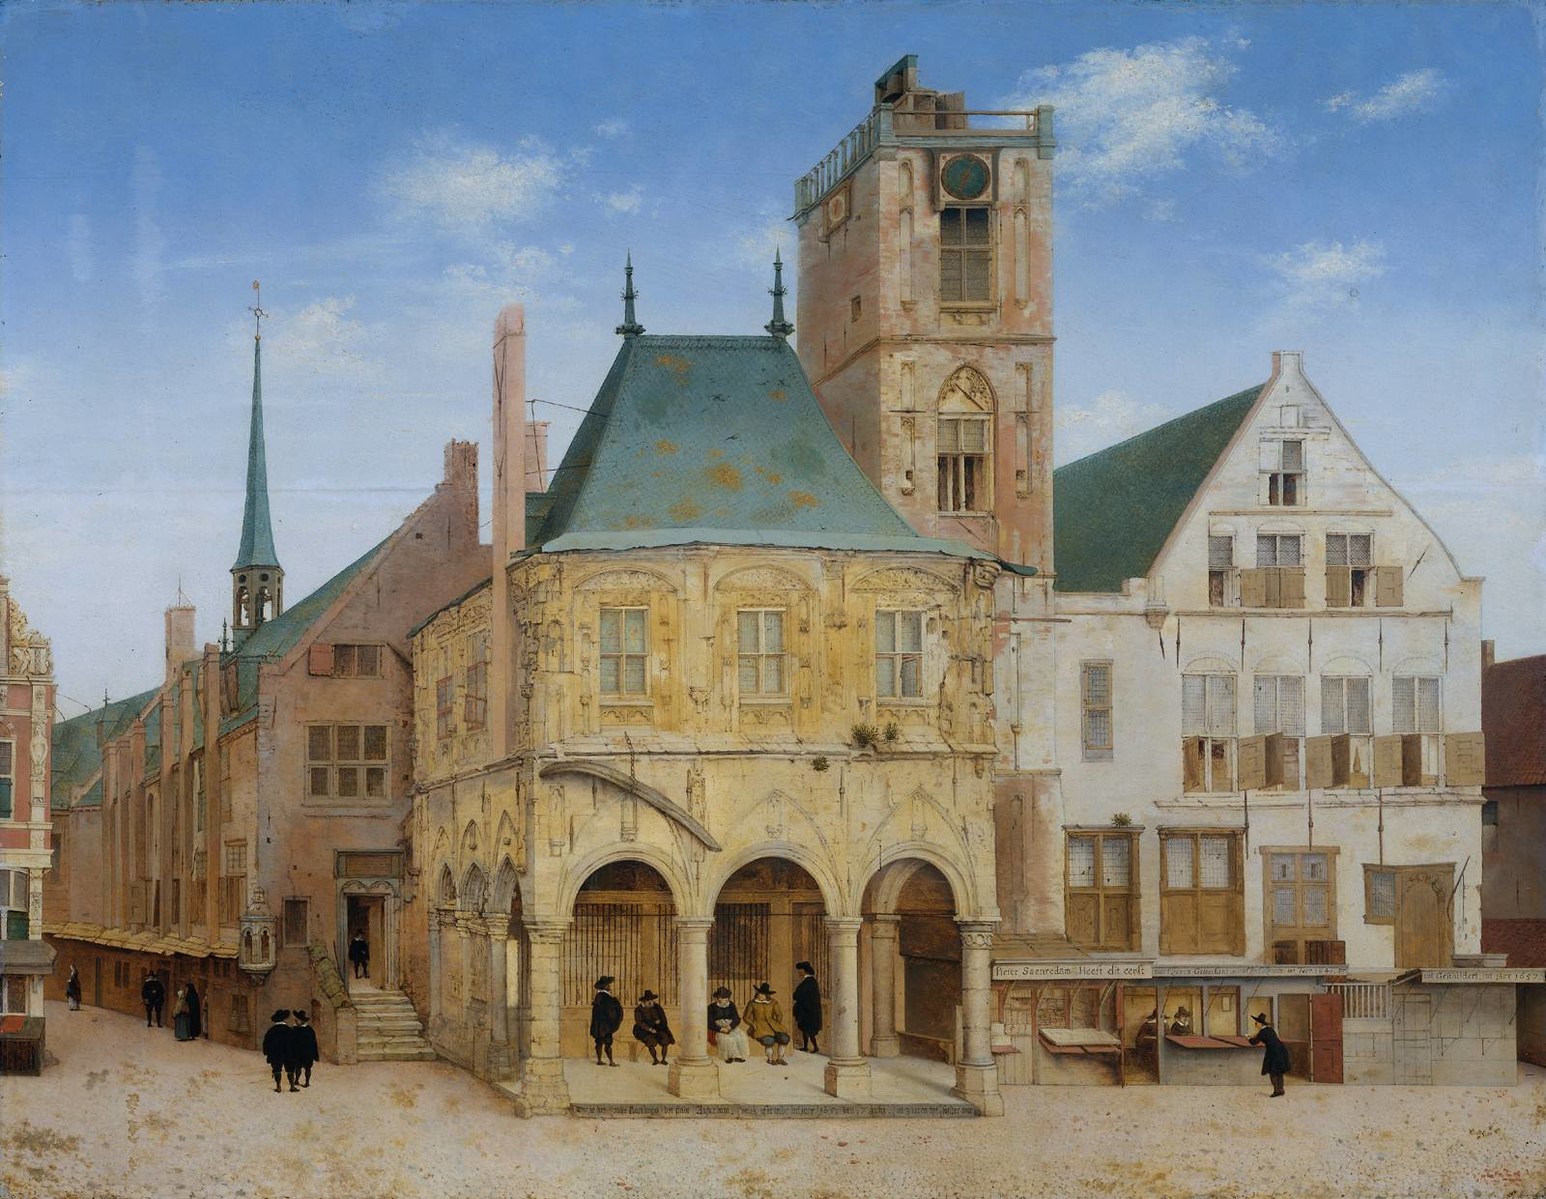 The old Town Hall where the Bank of Amsterdam was founded in 1609